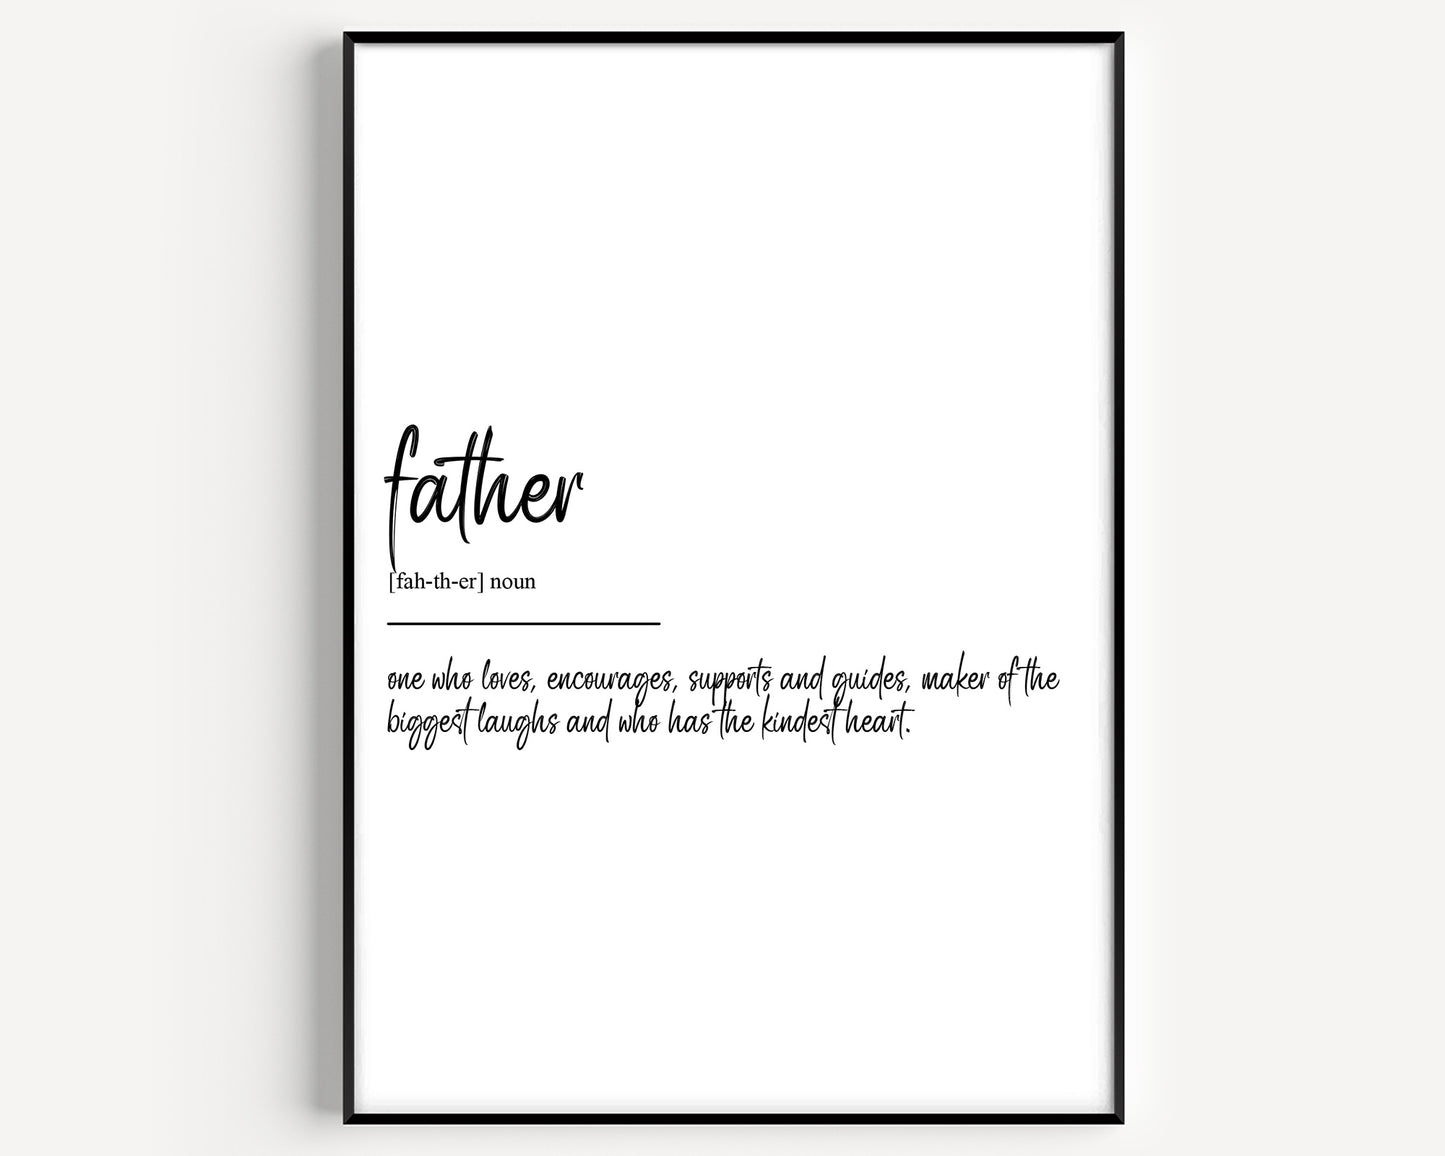 Father Definition Print - Magic Posters